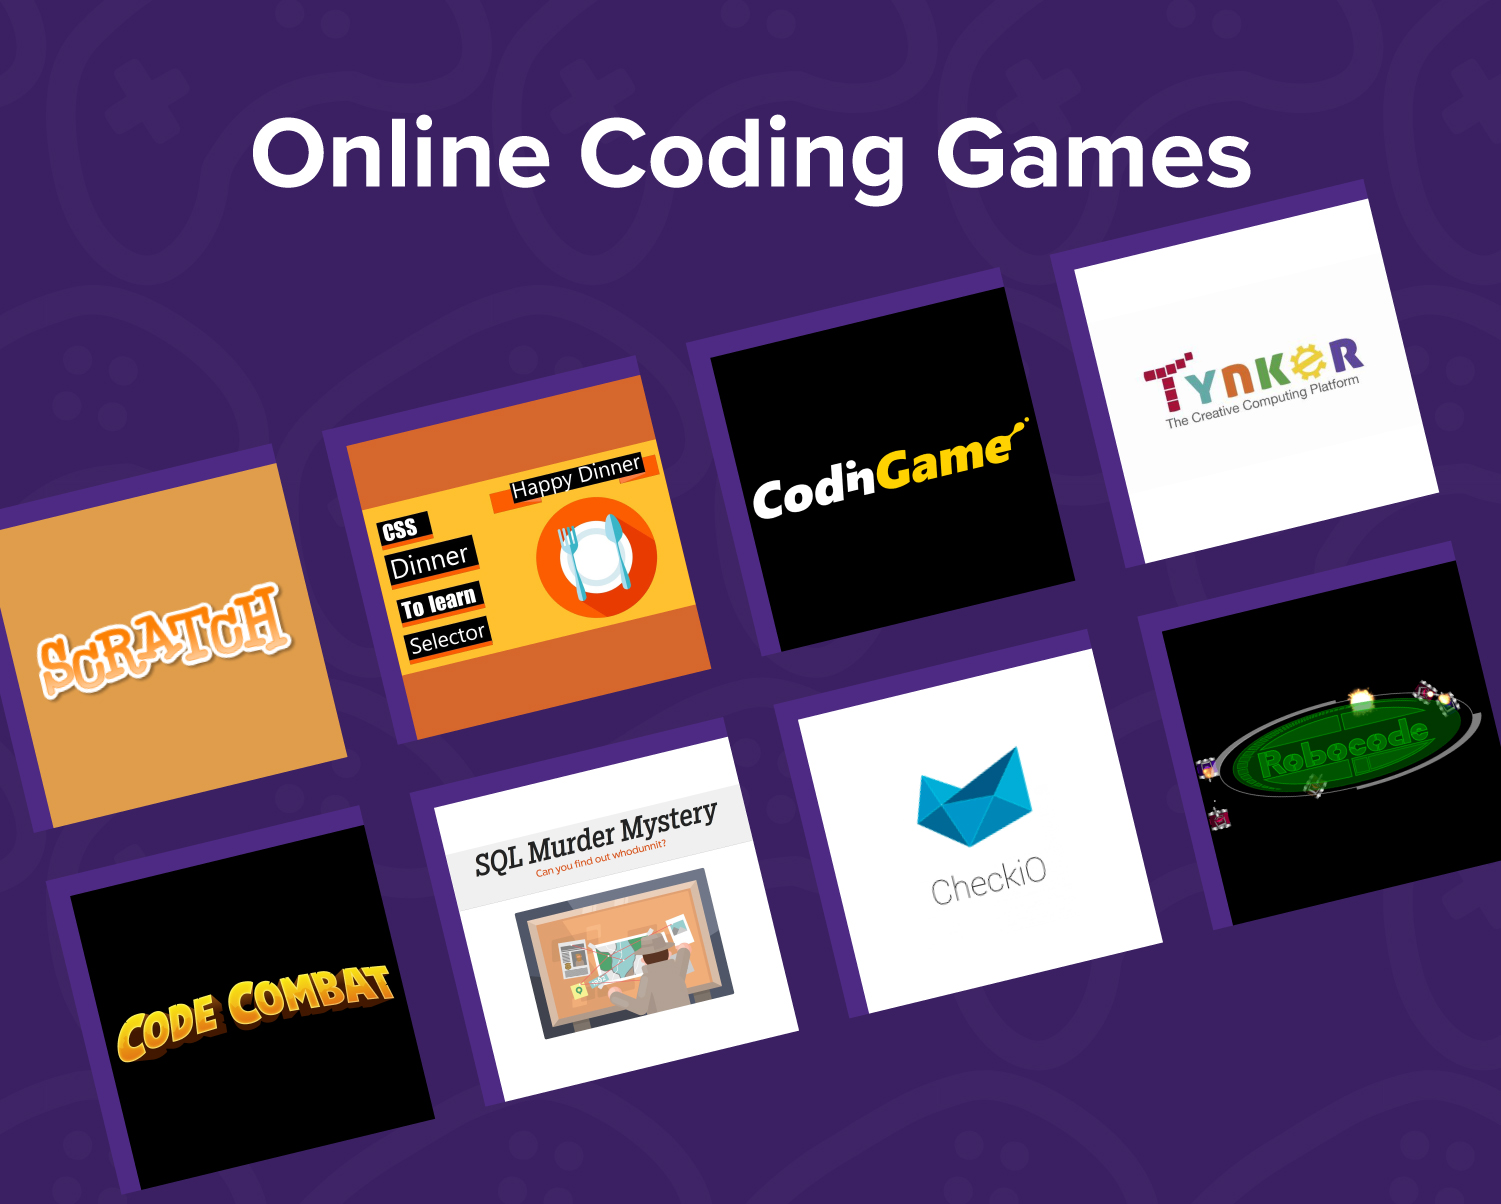 An image that lists all the online coding games mentioned in the article.